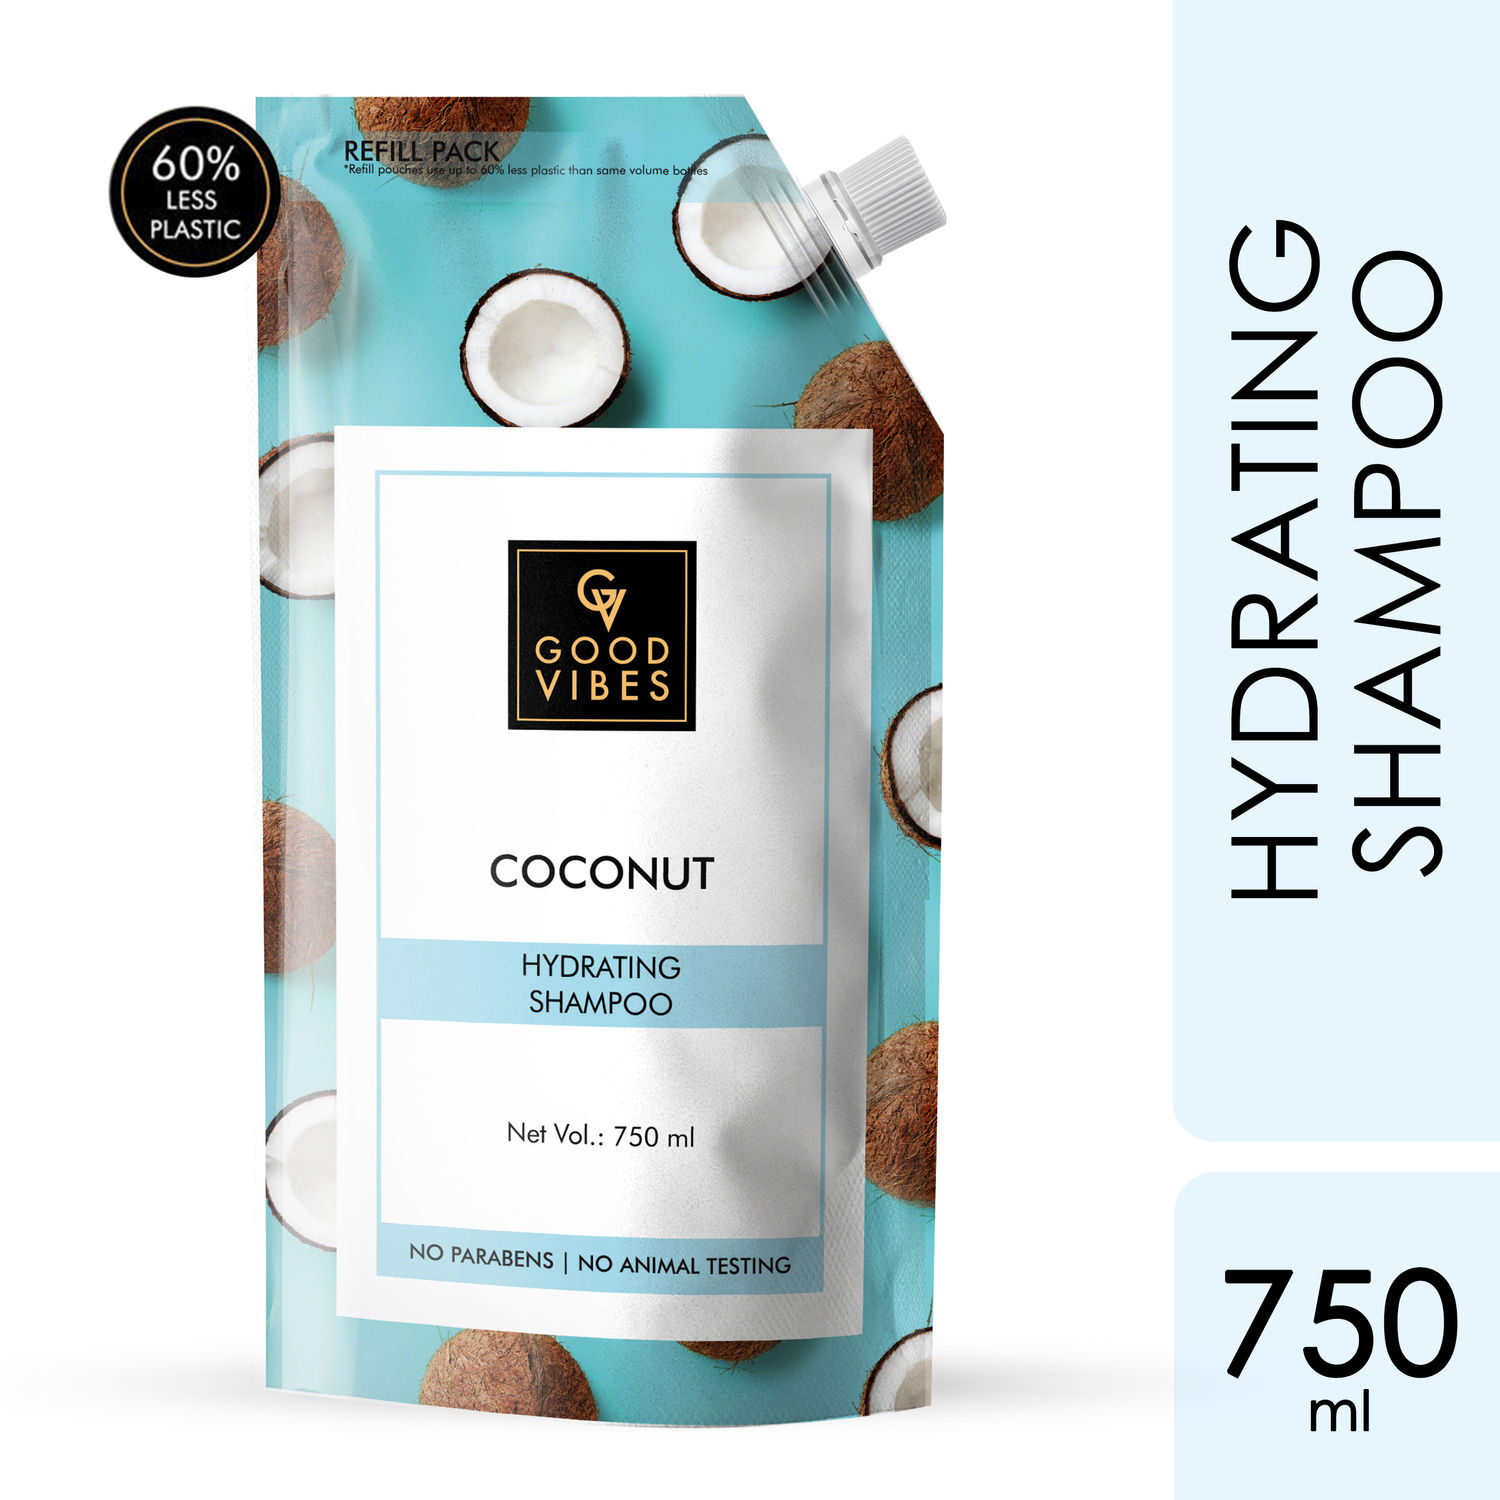 Buy Good Vibes Coconut Hydrating Shampoo Refill Pack (750 ml) - Purplle